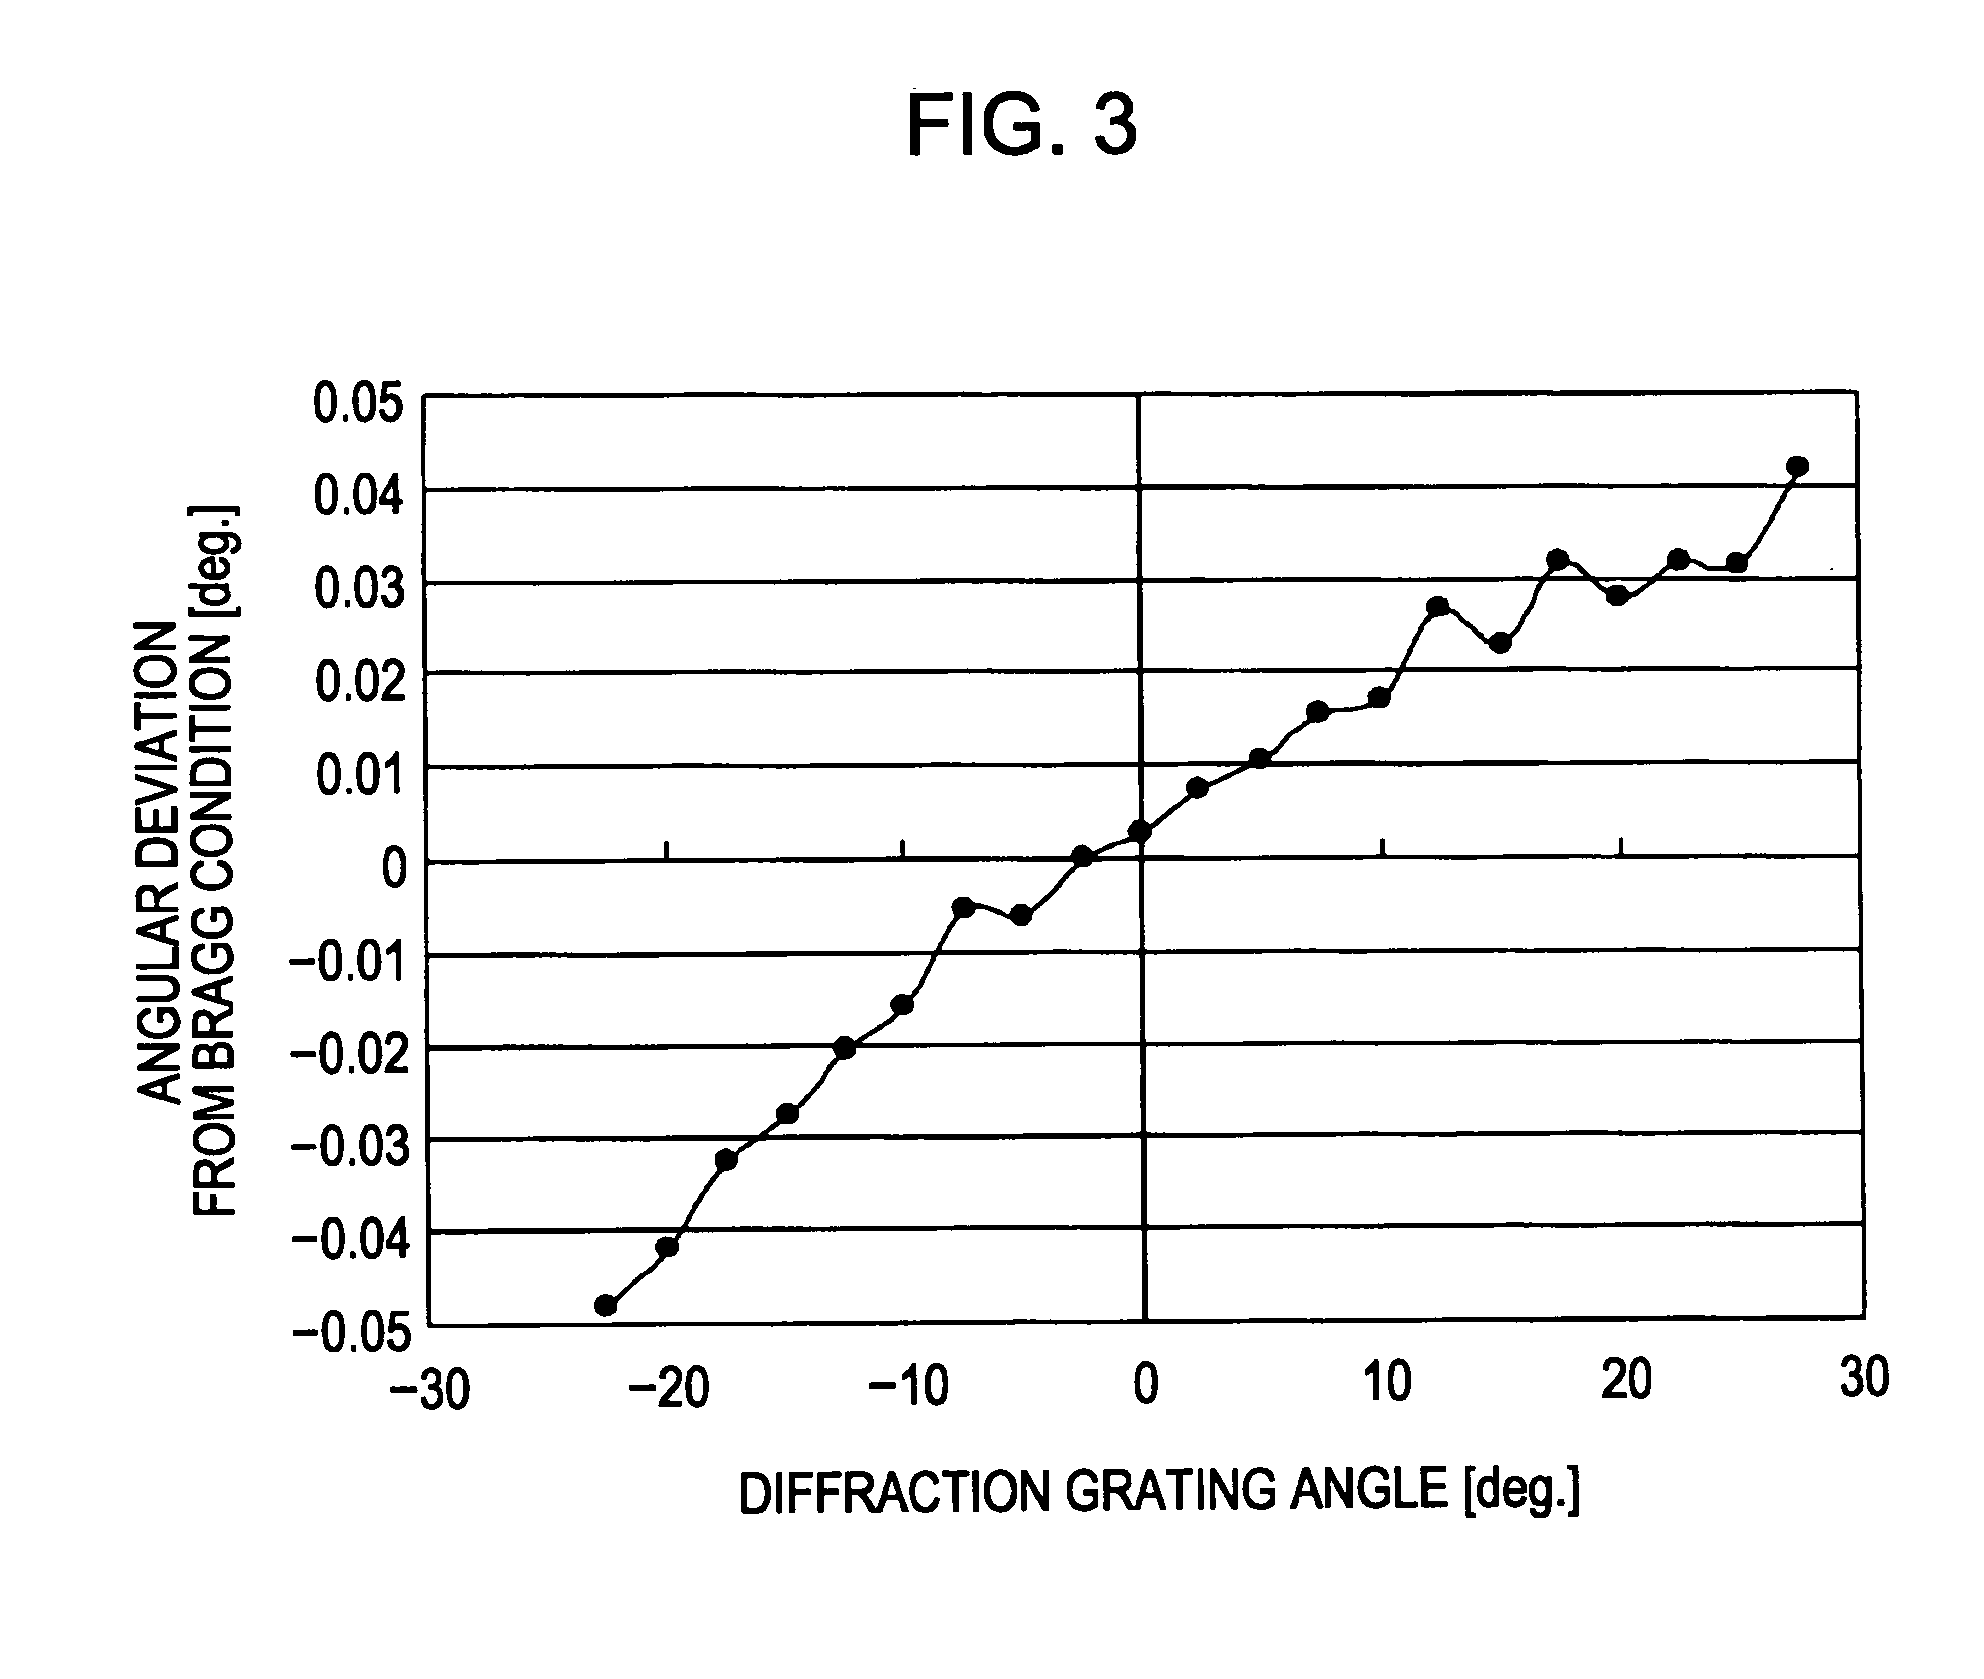 Holographic recording and reconstructing apparatus and method